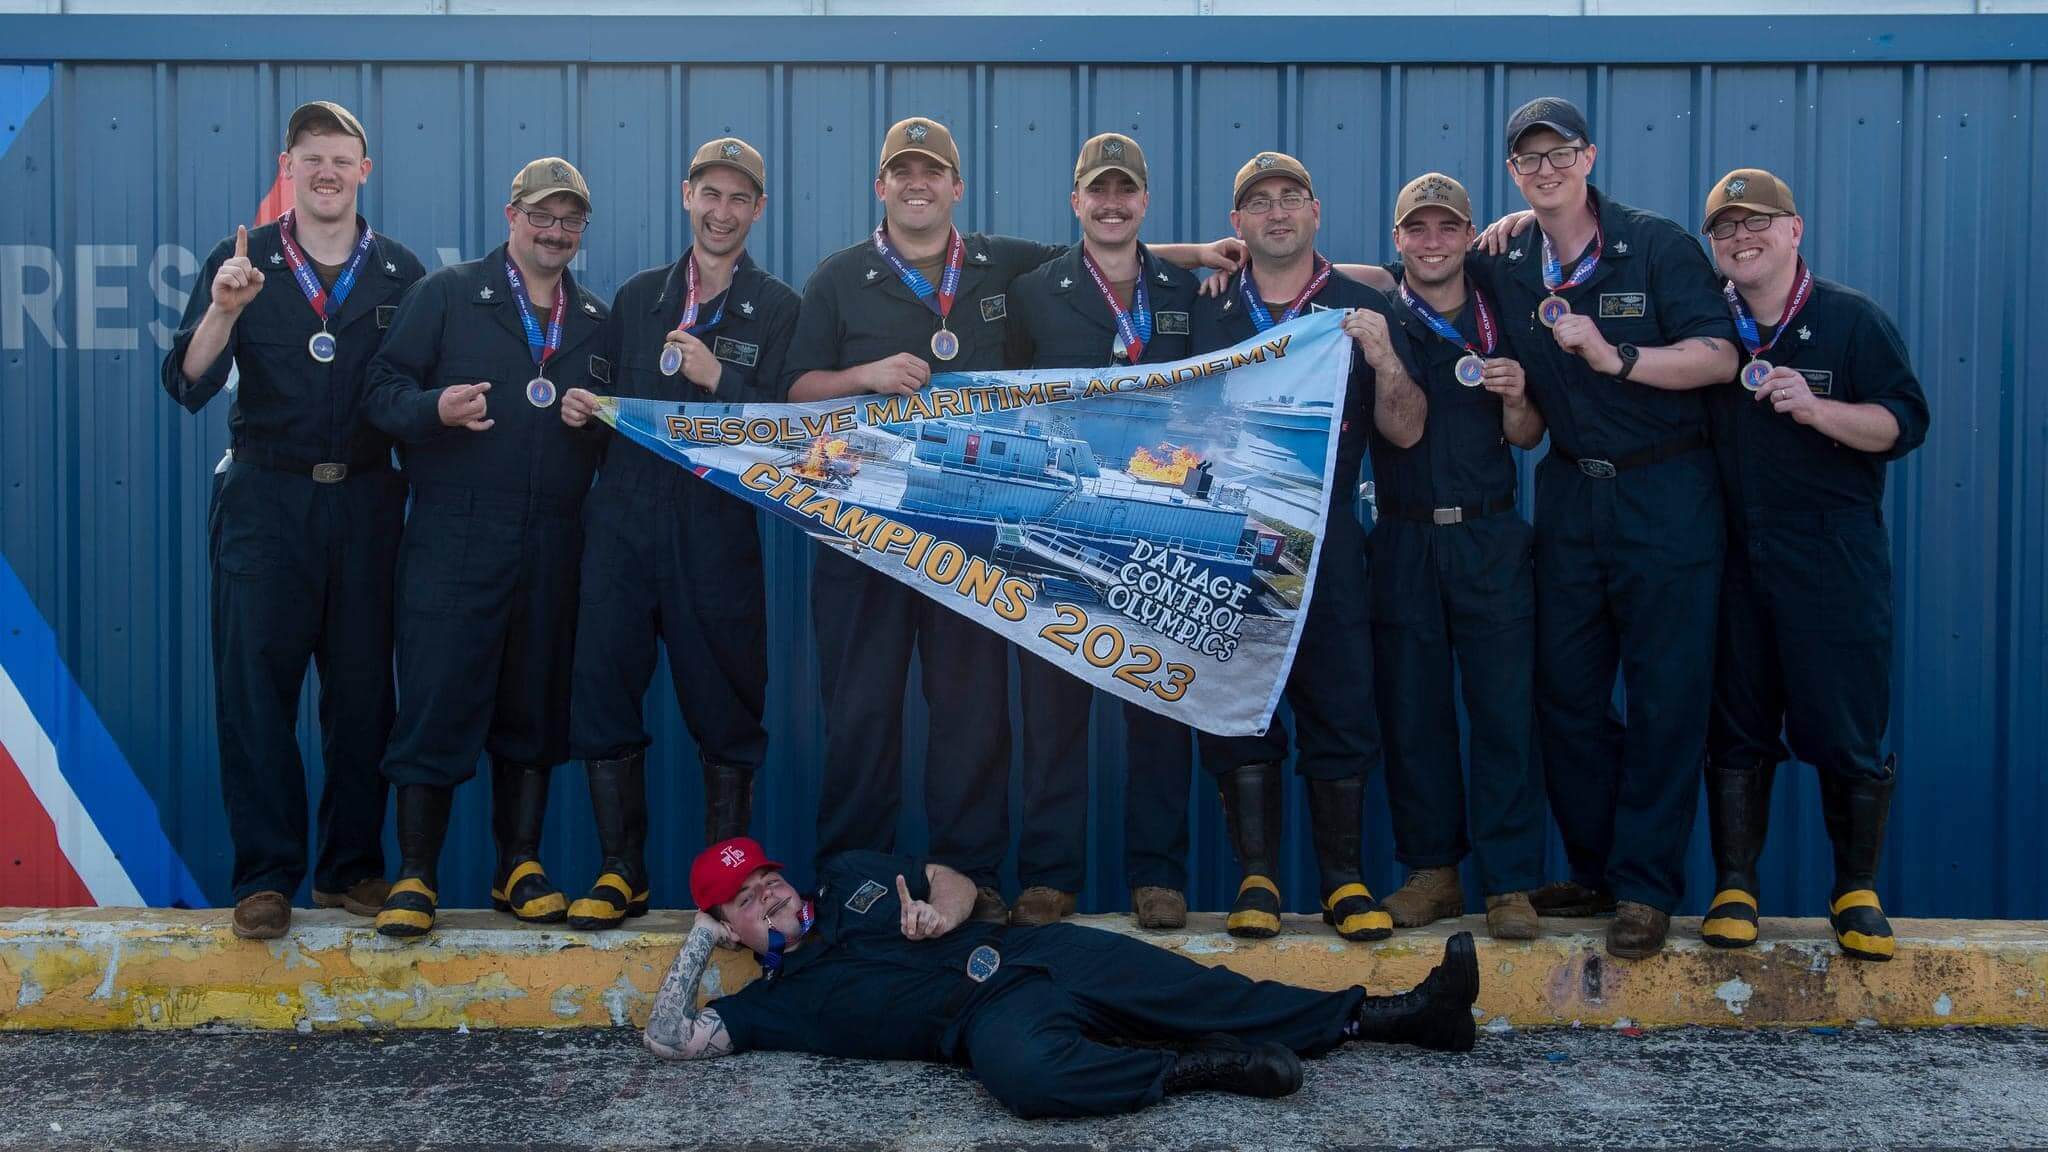 USS Indiana Takes Gold at Resolve's 18th Damage Control Olympics